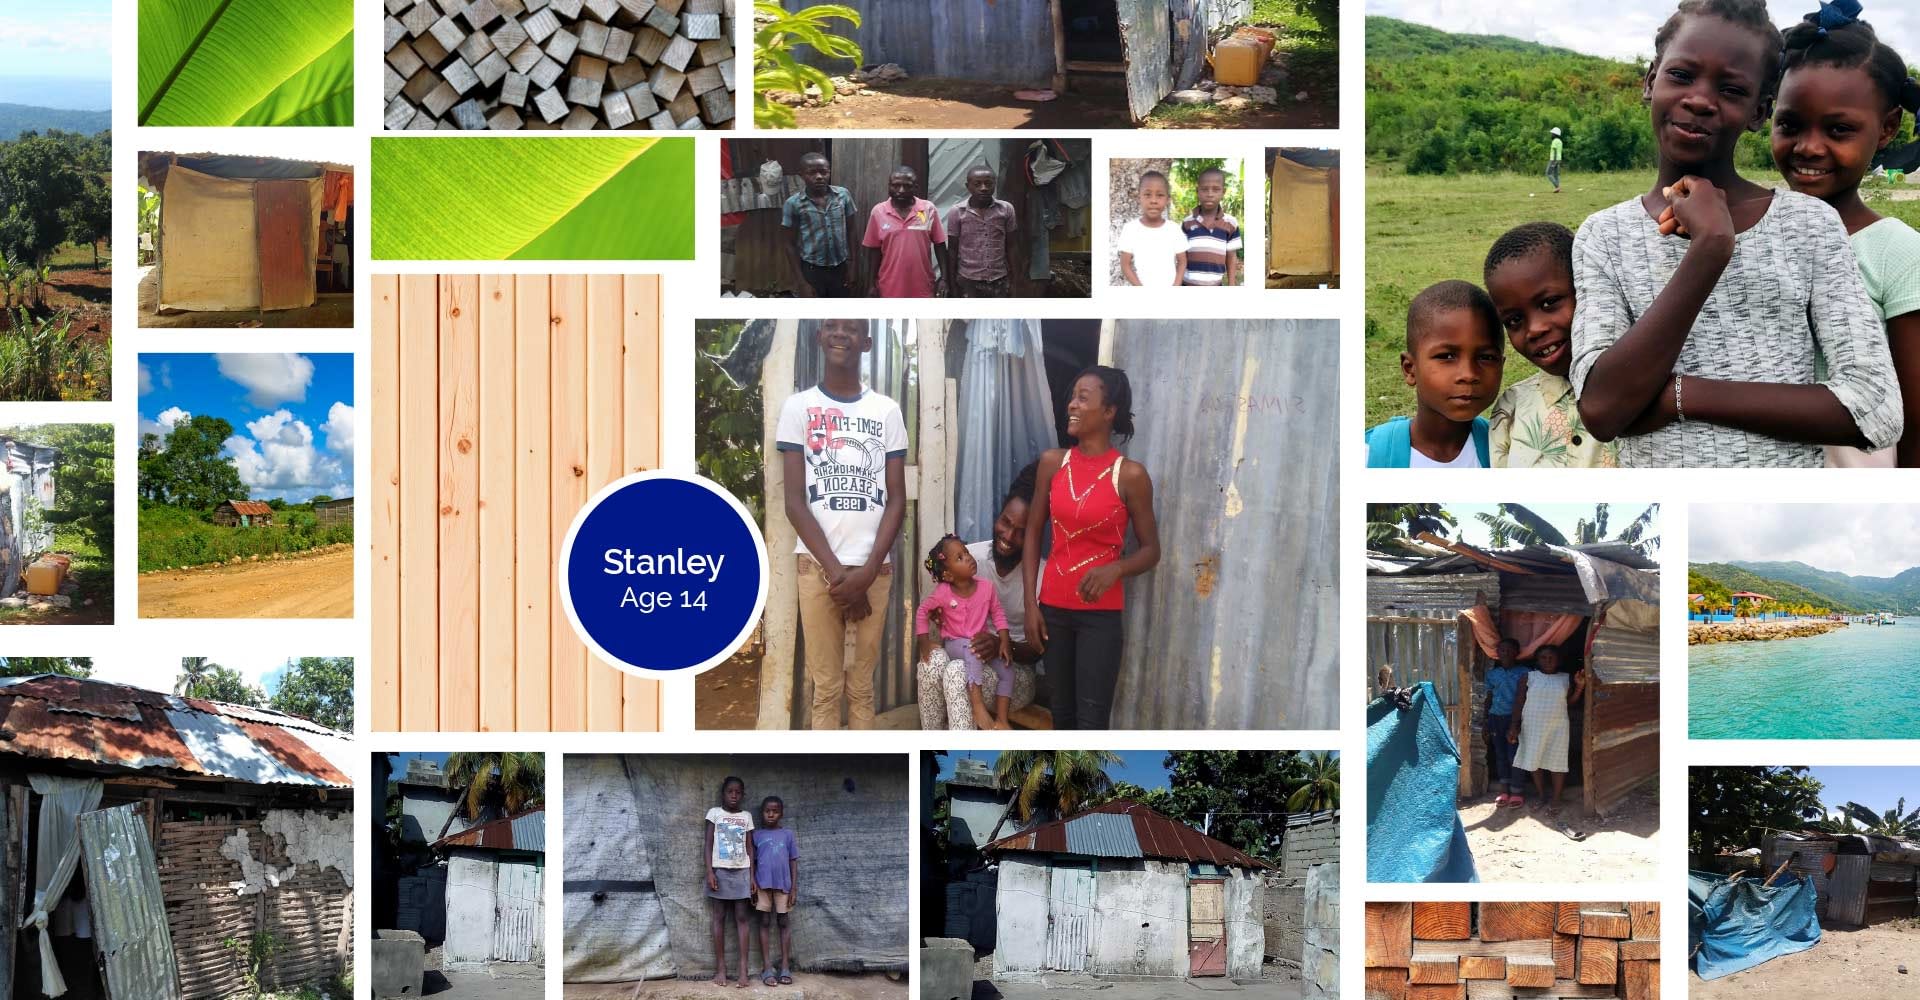 A photo collage of Stanley's home and family in Haiti